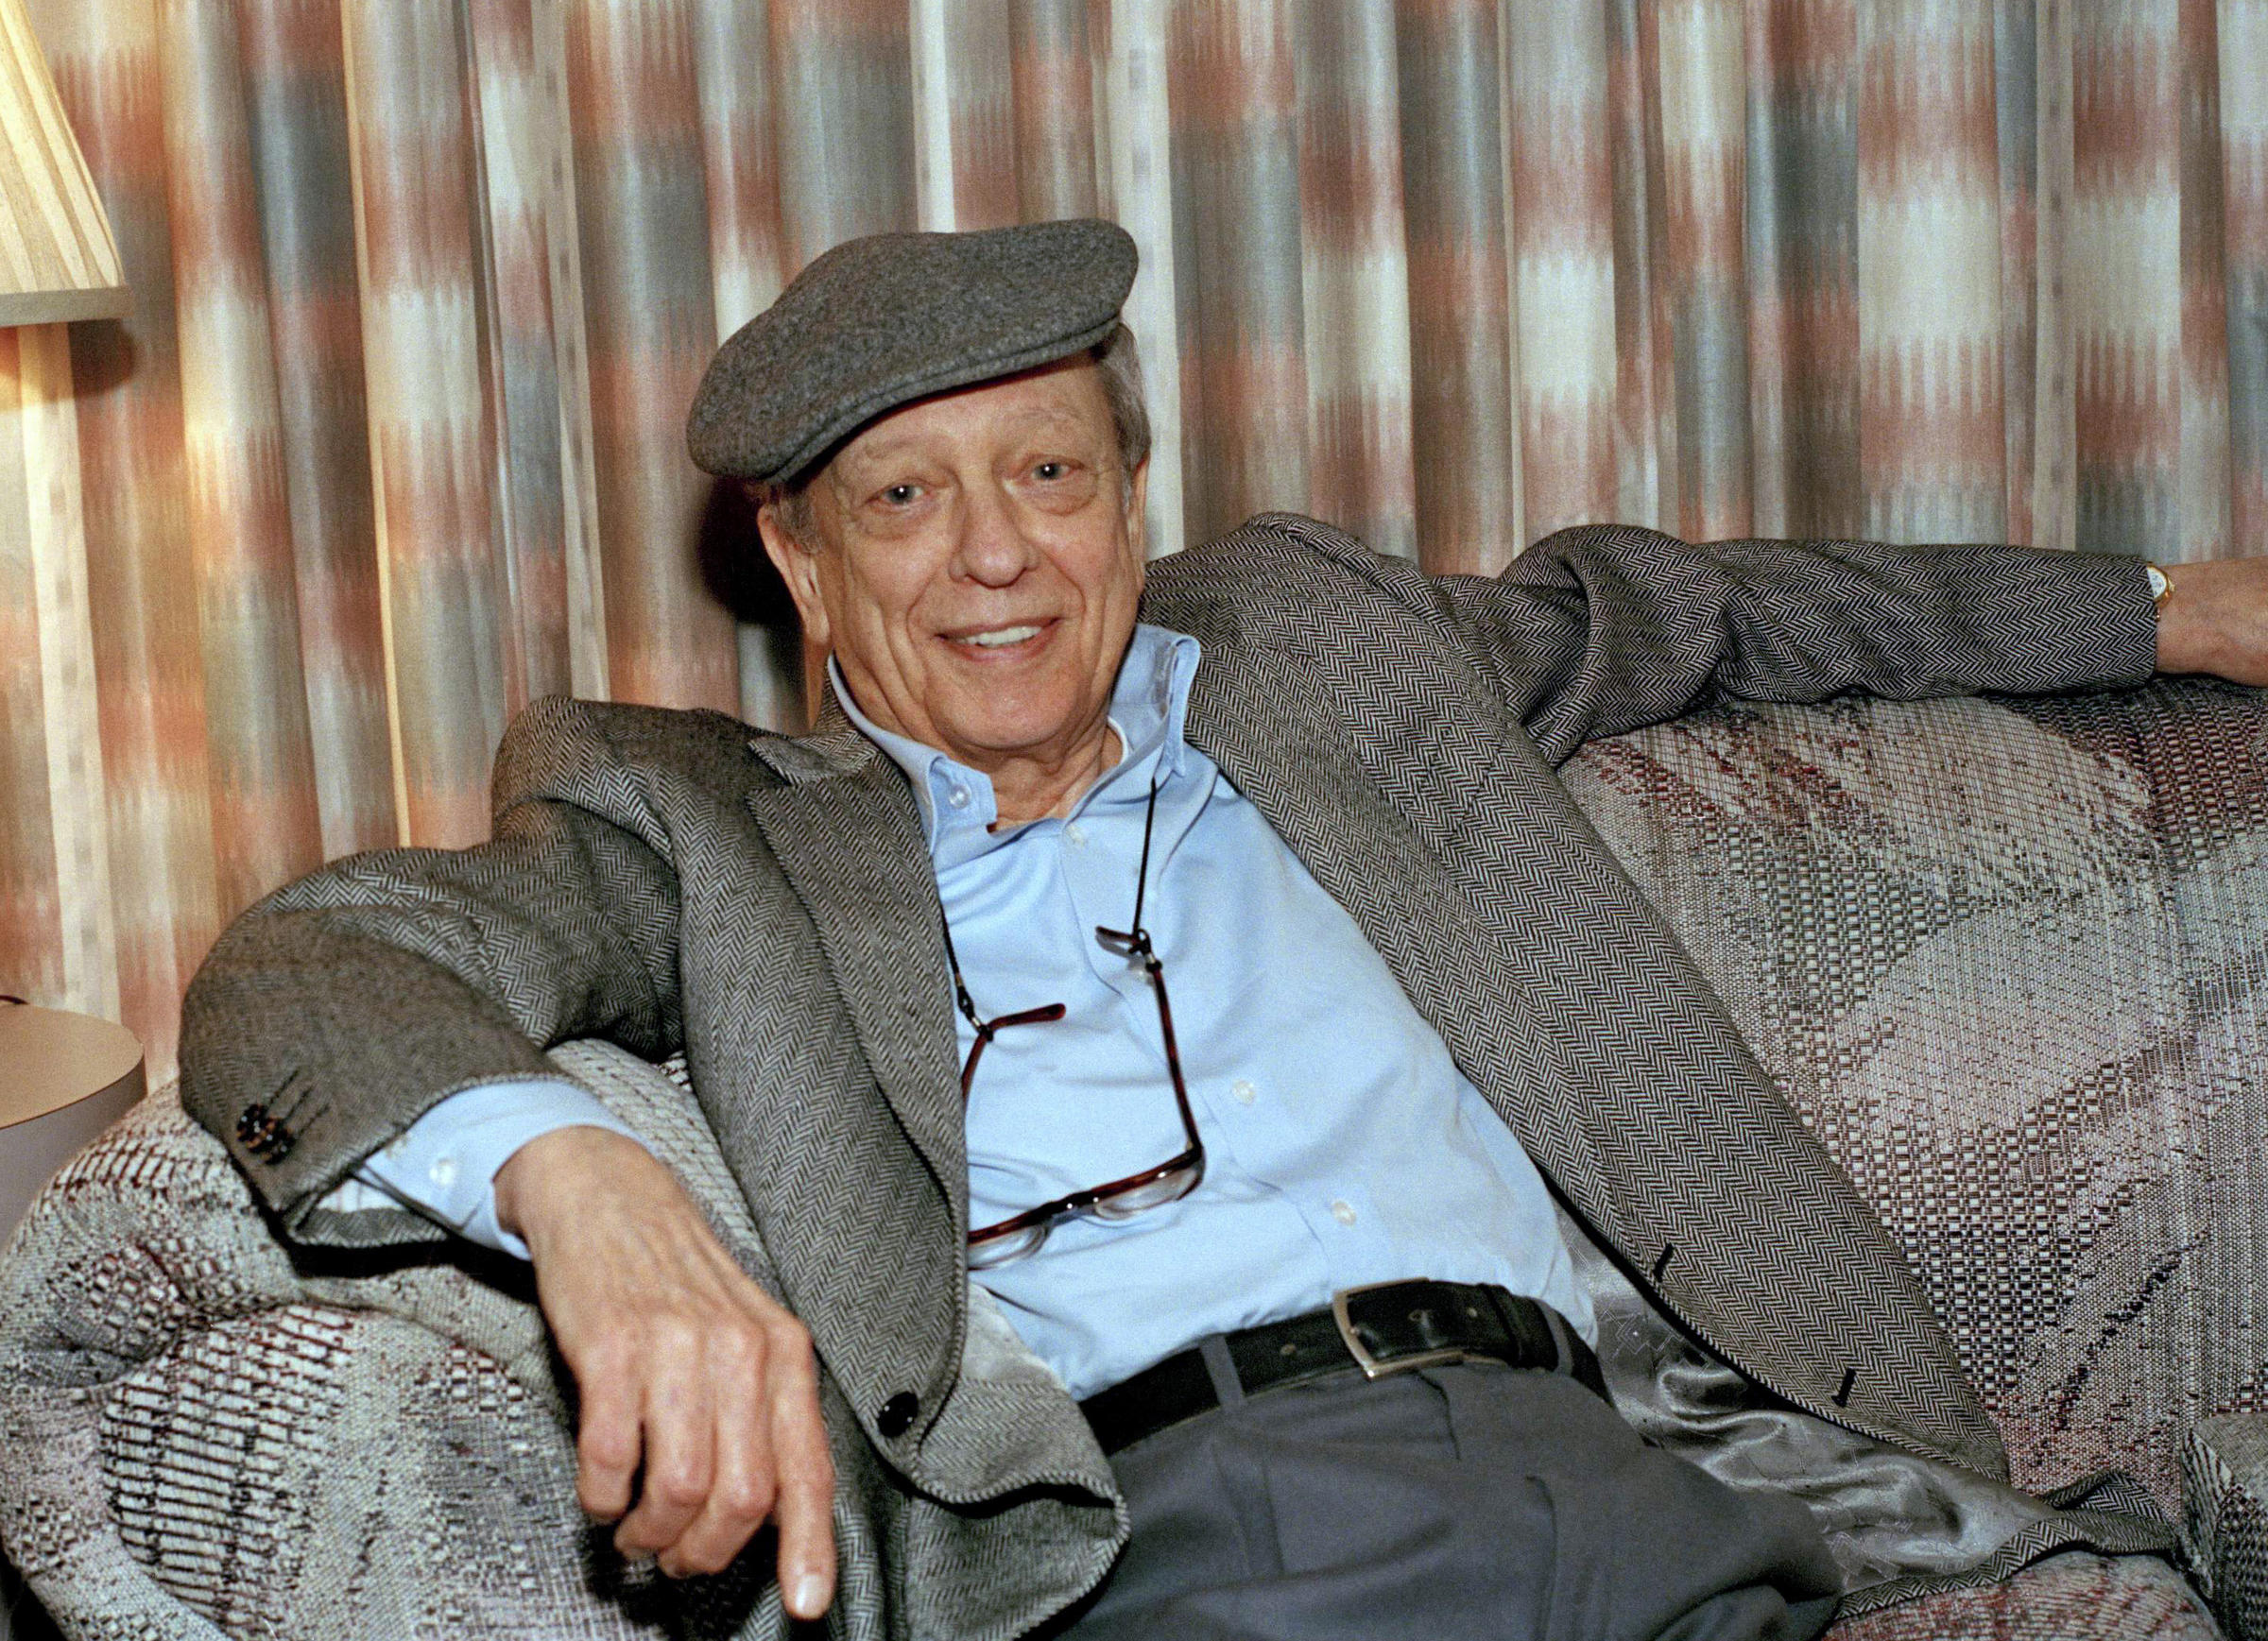 Don Knotts was a legendary American actor and comedian. 